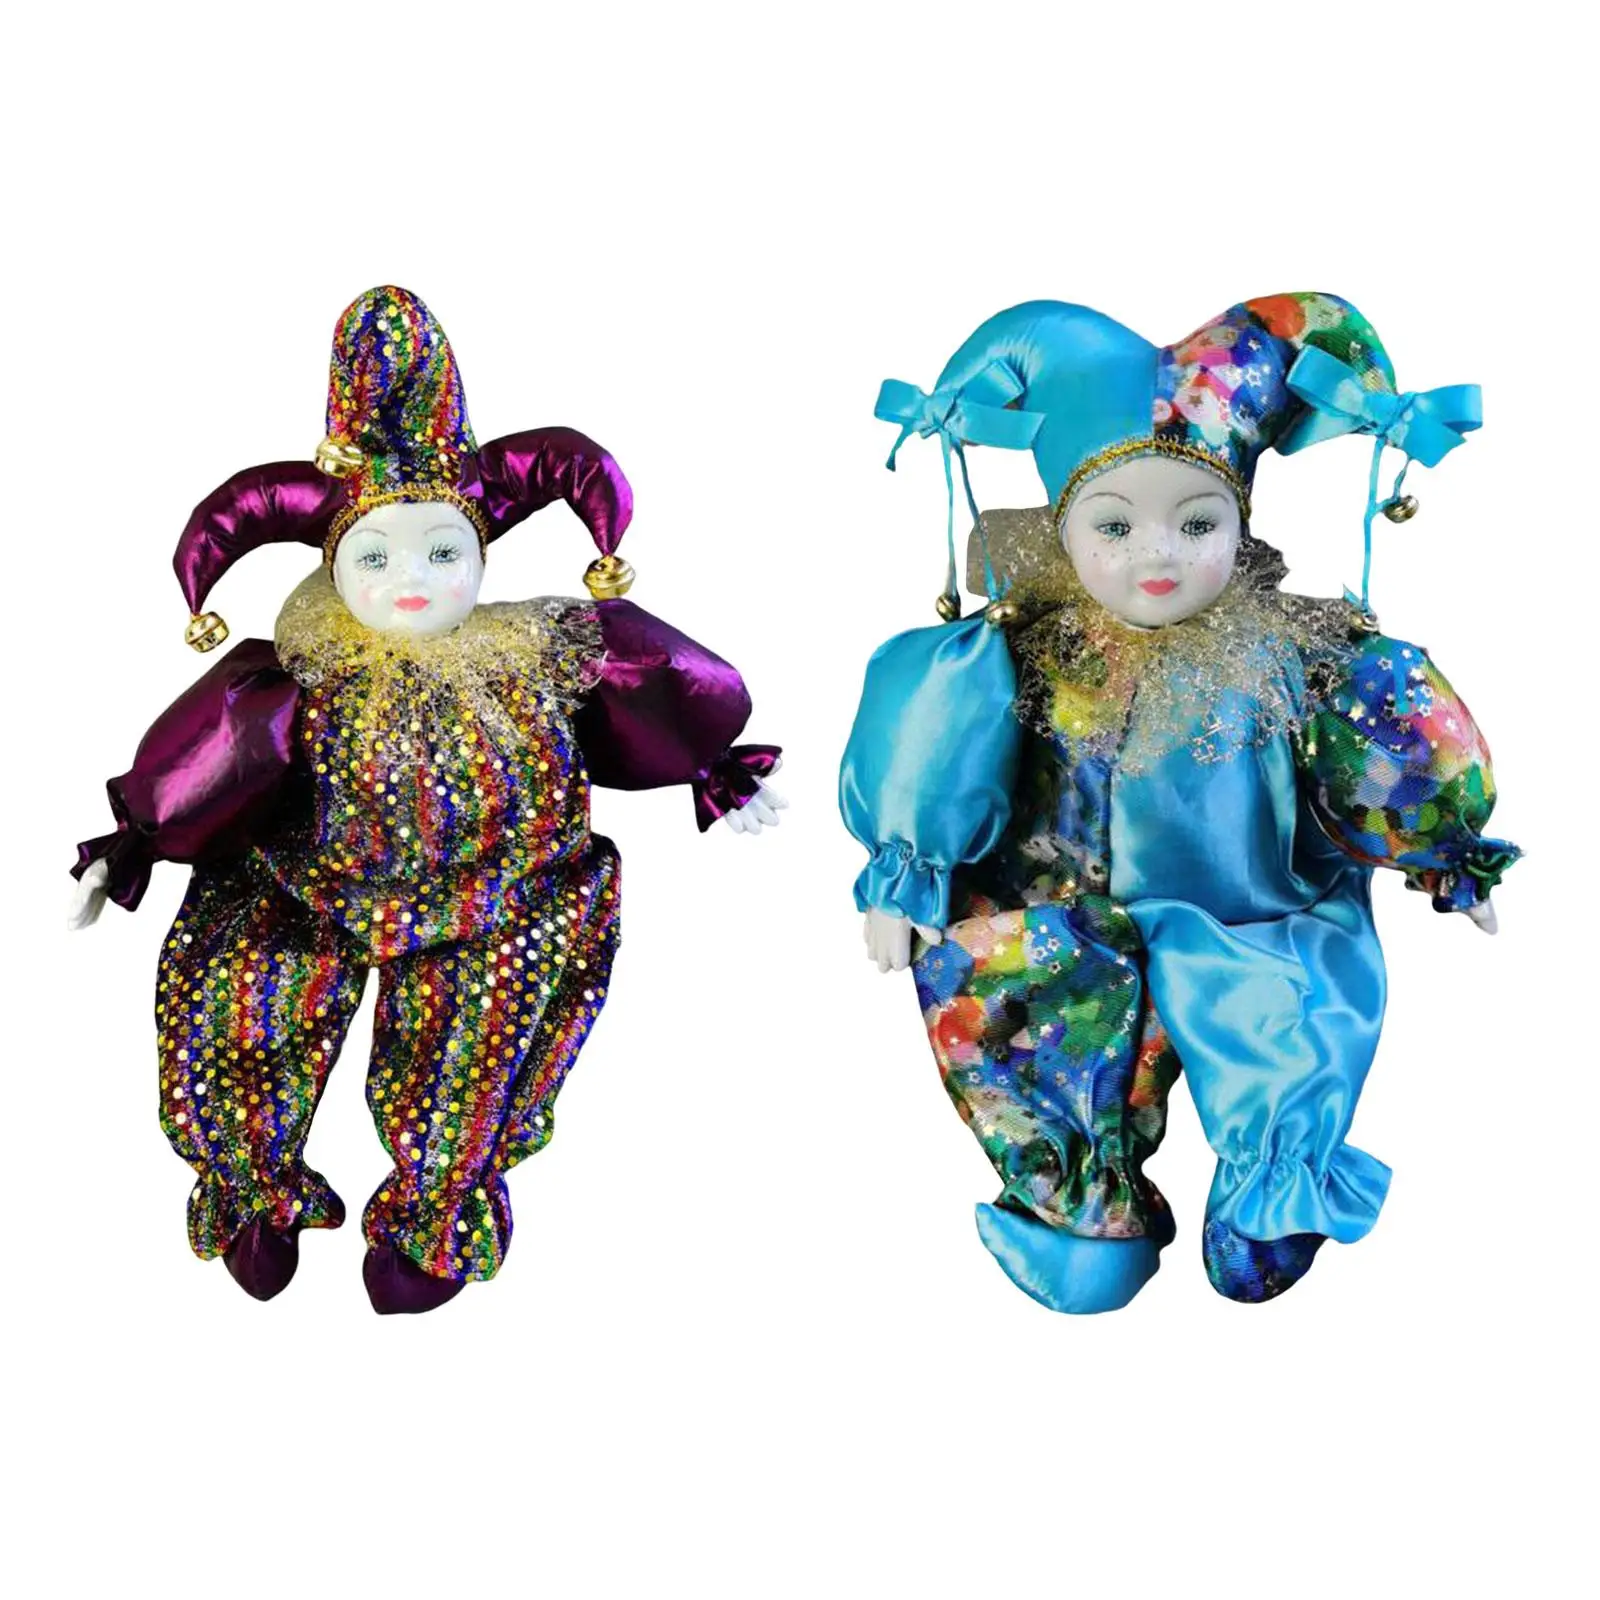 

Cute Clown Doll Figure Desk Ornaments Porcelain Clown Model Home Decoration Halloween Clown Doll Model for Holiday Party Favors